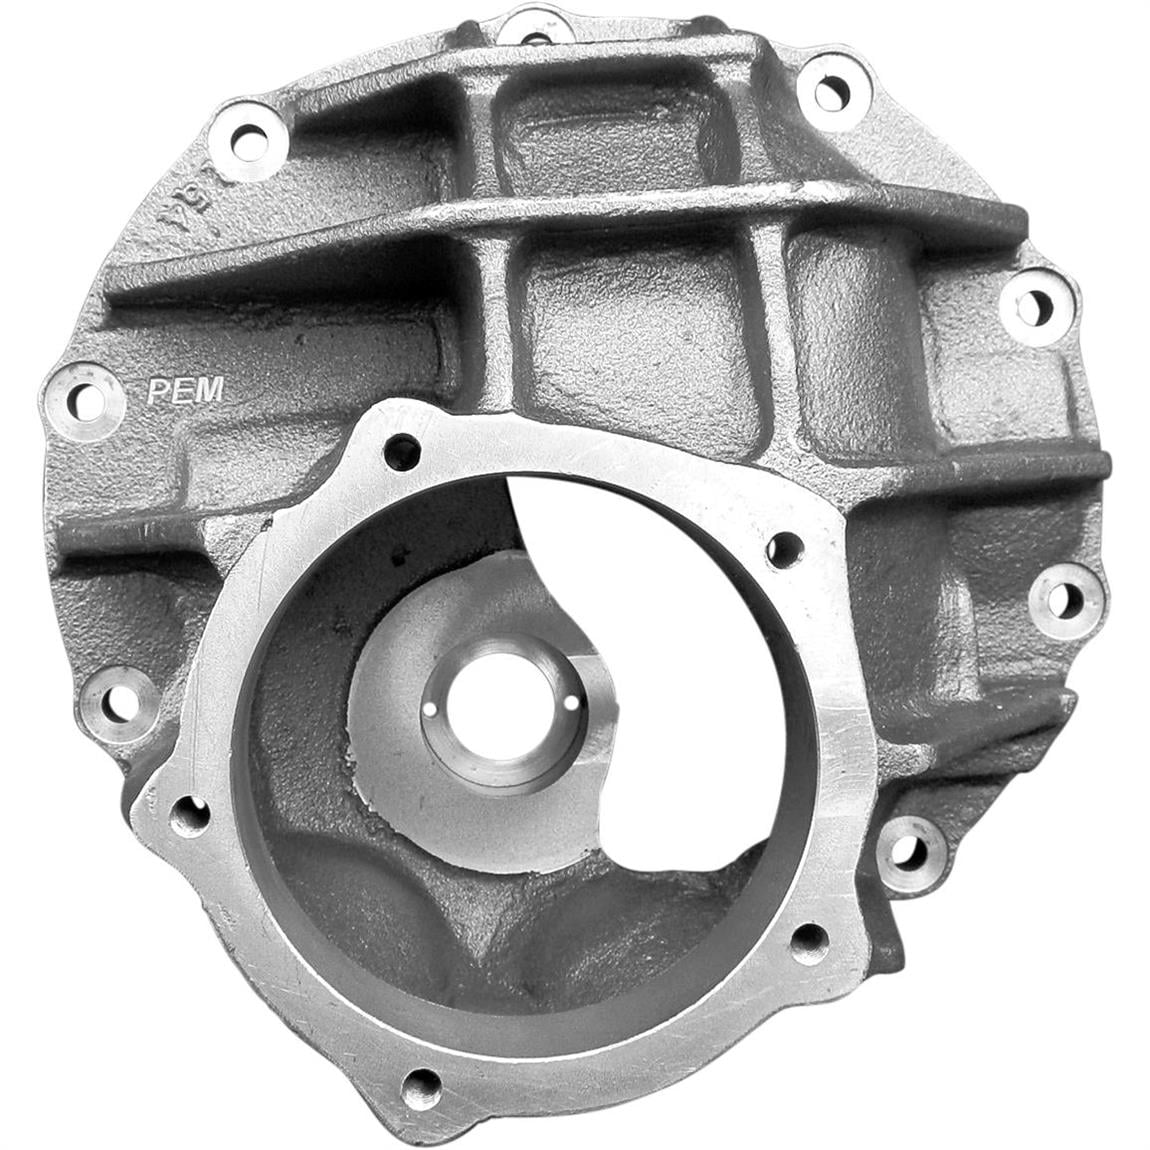 New Iron Carrier Housing for 9 Inch Ford w/ 3.25 Inch Caps 